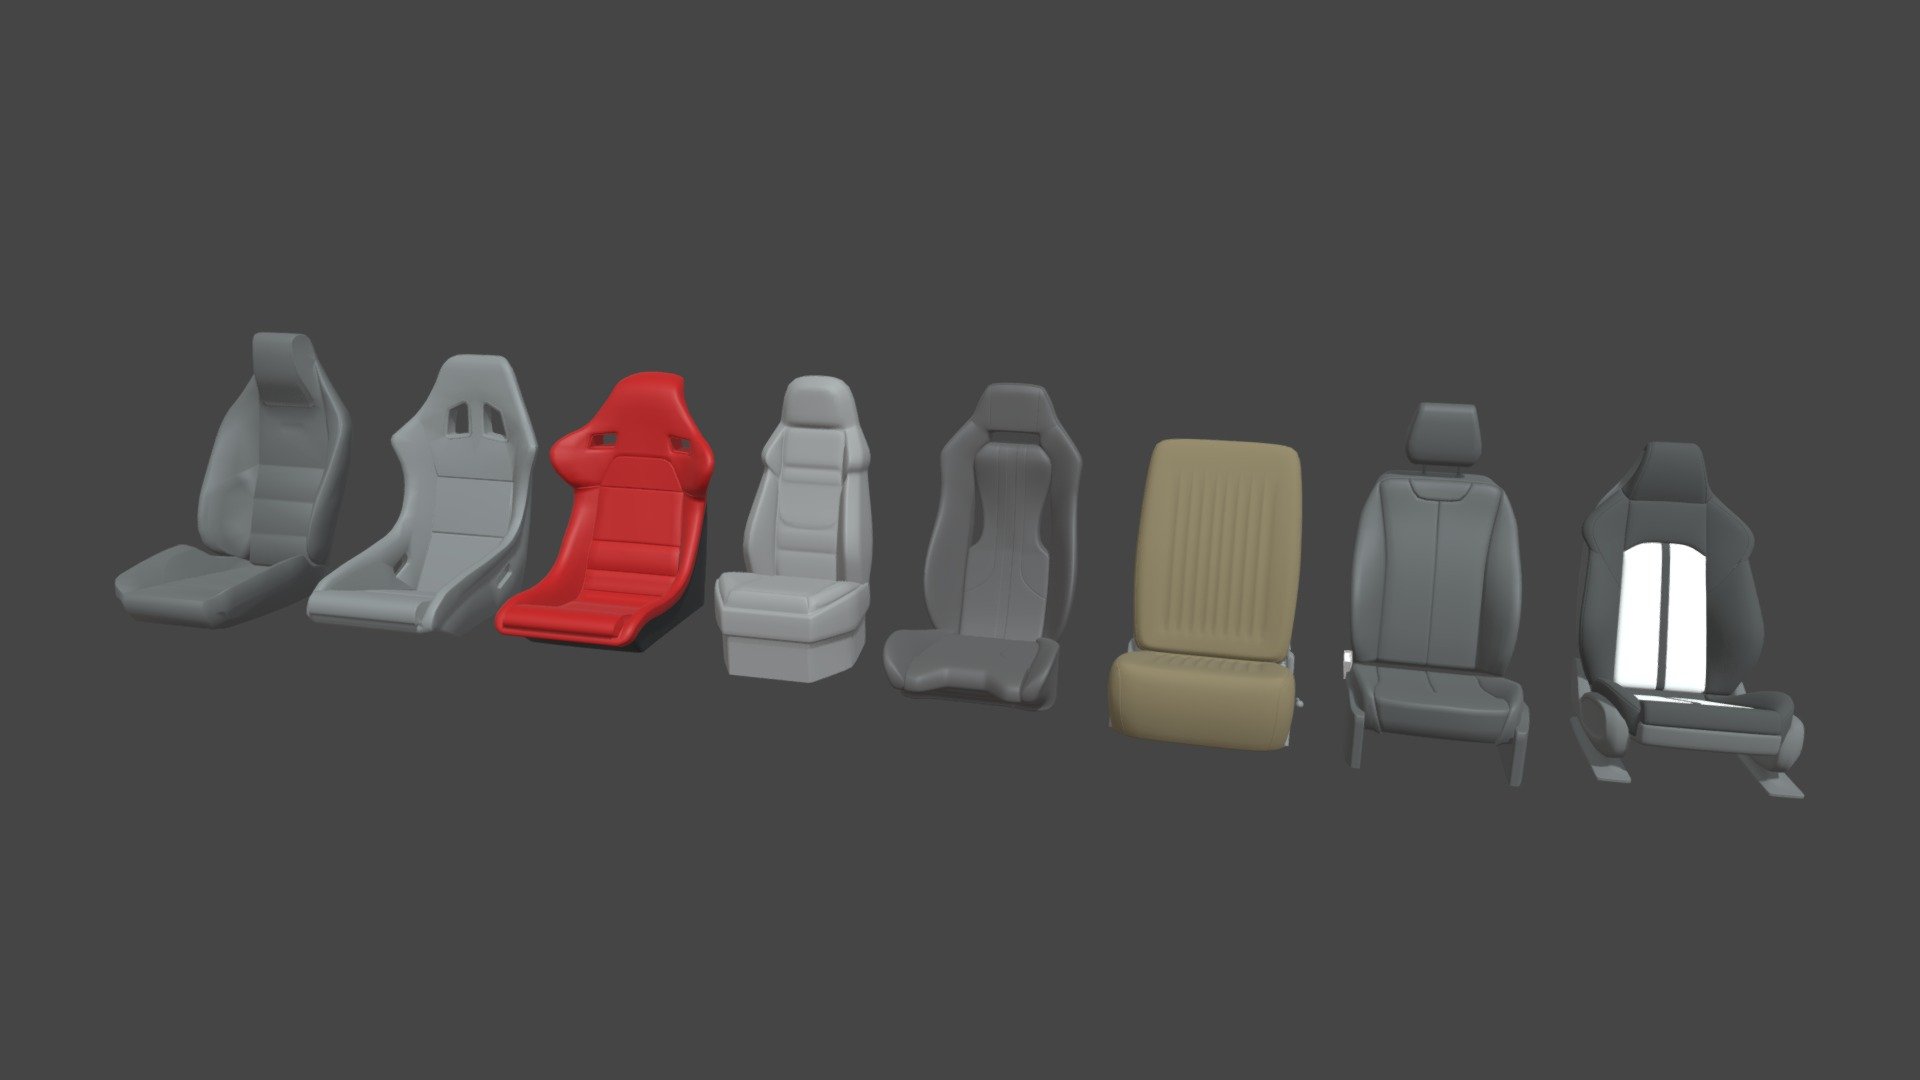 This model contains a Car Seat Pack based on a real stylized car seat from a real italian and german sport car which i modeled in Maya 2018 and is available for selling as a full car containing interior and just exterior. This model is perfect to create a new great scene with different car pieces or part of a car model.

This model is one of a great collection of car parts and car seats that are modeled and separated in 3 different packs and every different car seat ready on my profile. Some of this seats are ready for printing and others not. Any doubt you have contact me.

If you need any kind of help contact me, i will help you with everything i can. If you like the model please give me some feedback, I would appreciate it.

Don’t doubt on contacting me, i would be very happy to help. If you experience any kind of difficulties, be sure to contact me and i will help you. Sincerely Yours, ViperJr3D - Car Seat Pack 03 - Buy Royalty Free 3D model by ViperJr3D 3d model